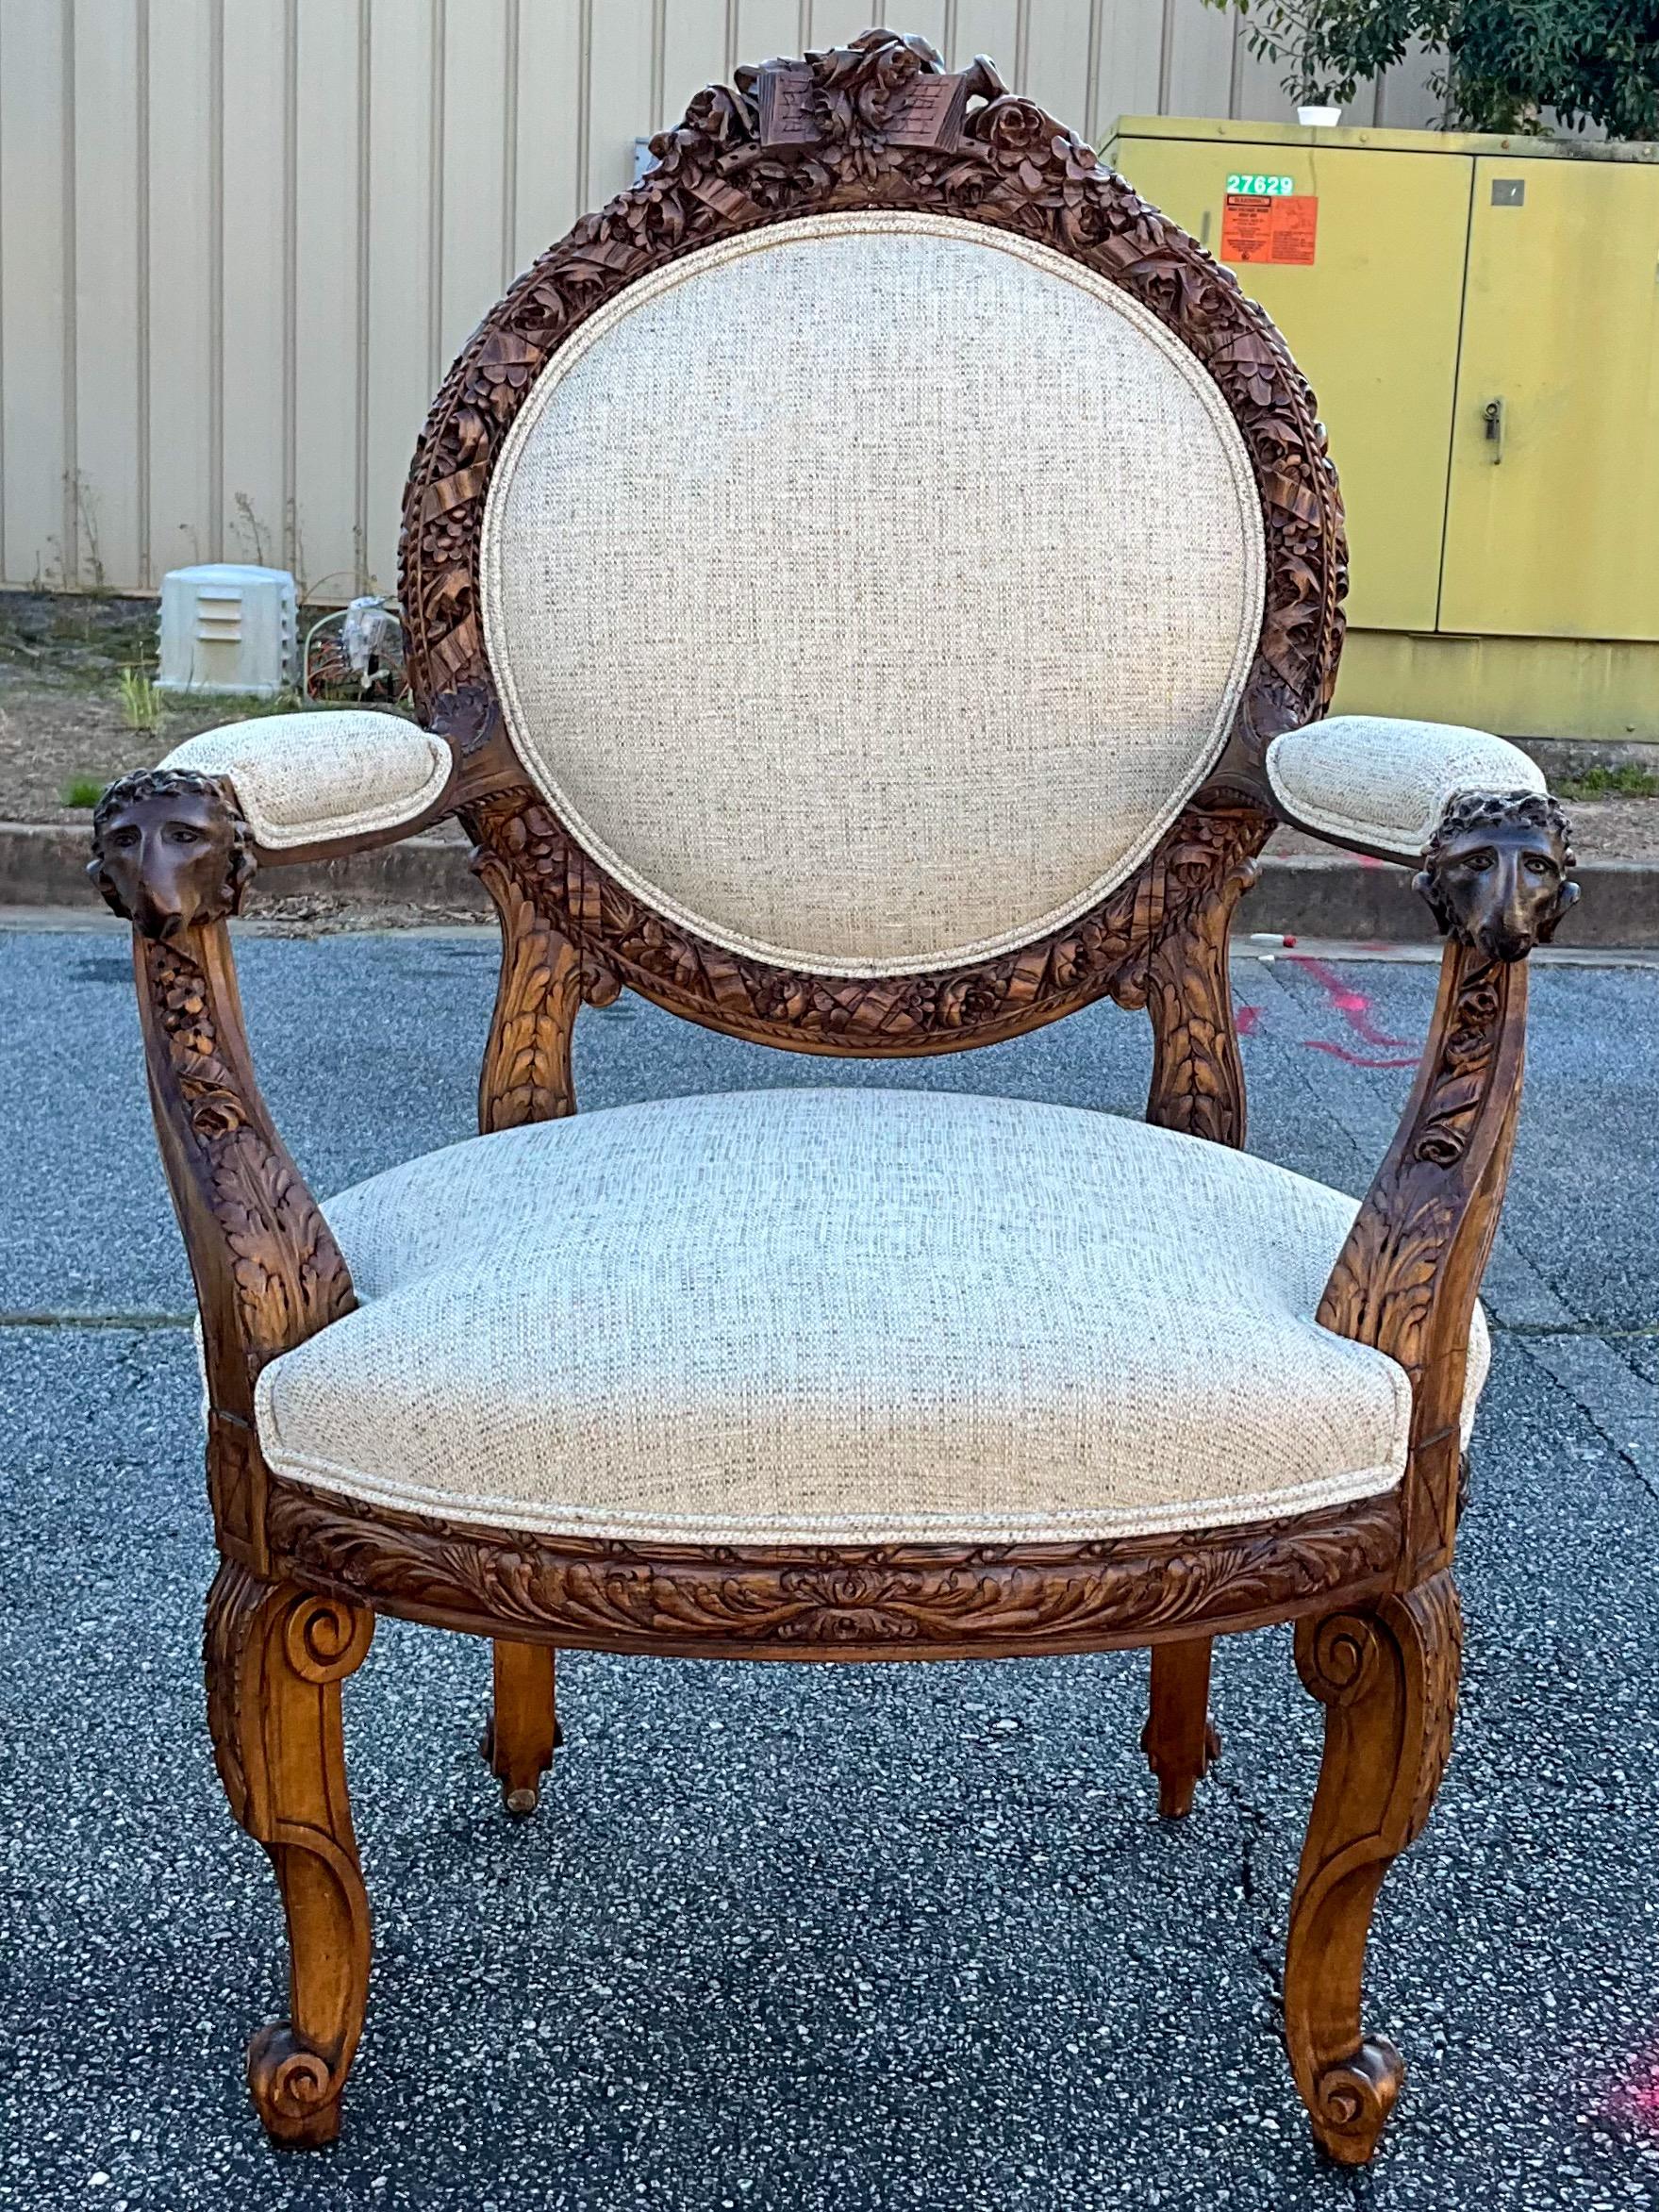 19th-C. French Neo-Classical Carved Walnut Bergere Chairs with Rams, Pair In Good Condition For Sale In Kennesaw, GA